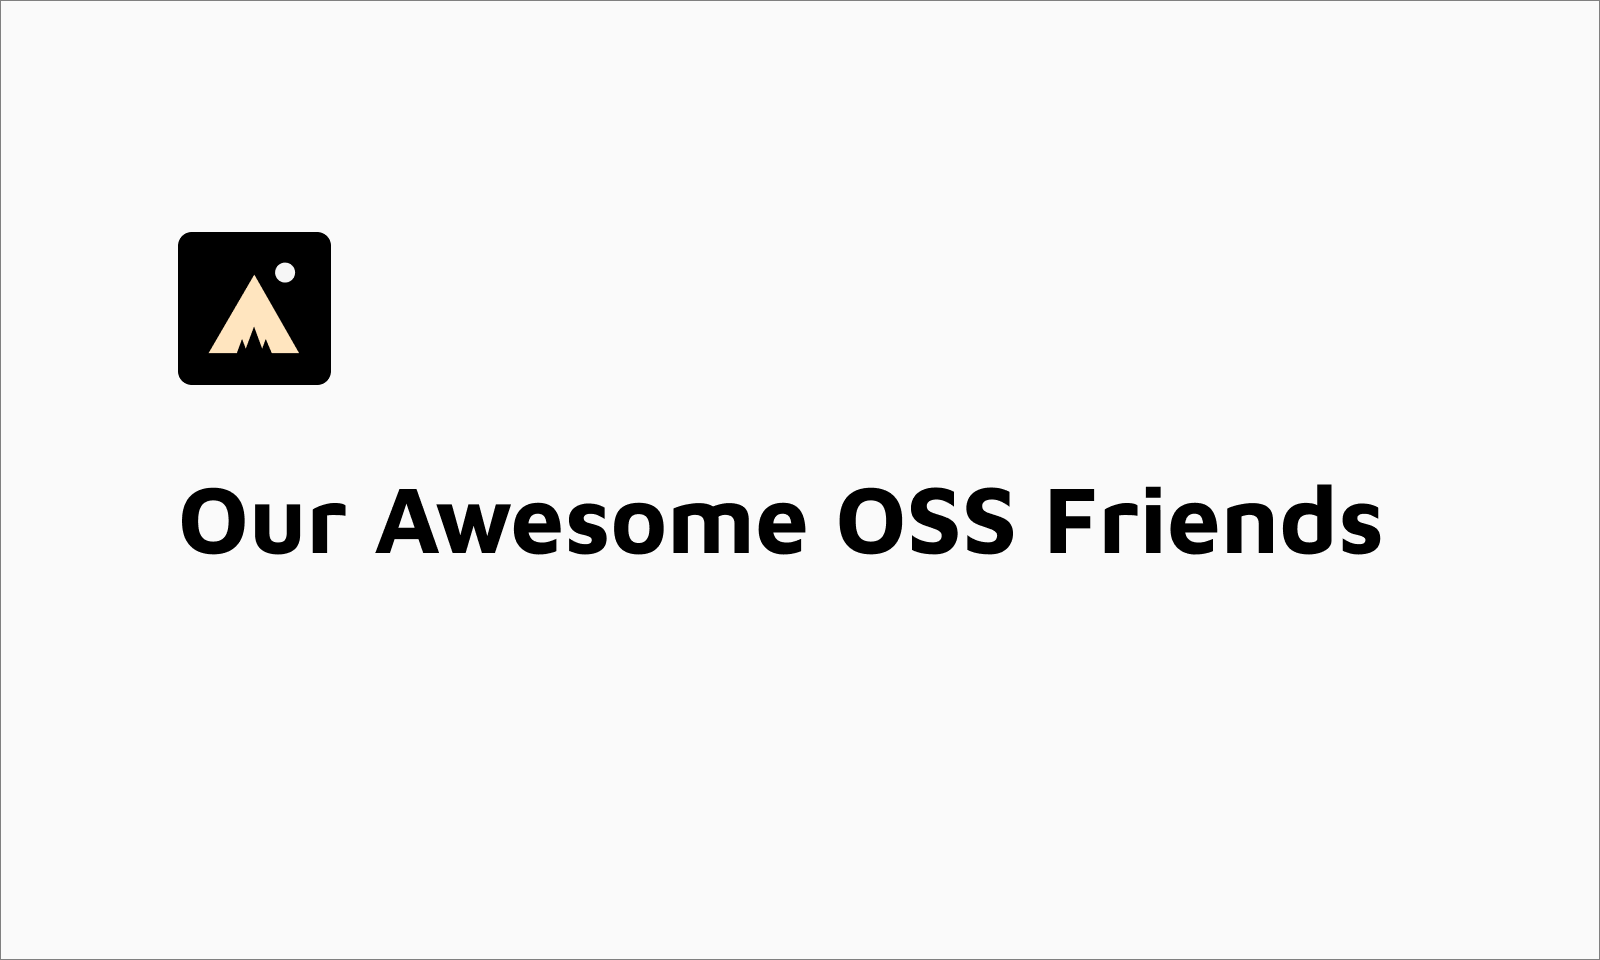 Our awesome OSS friends